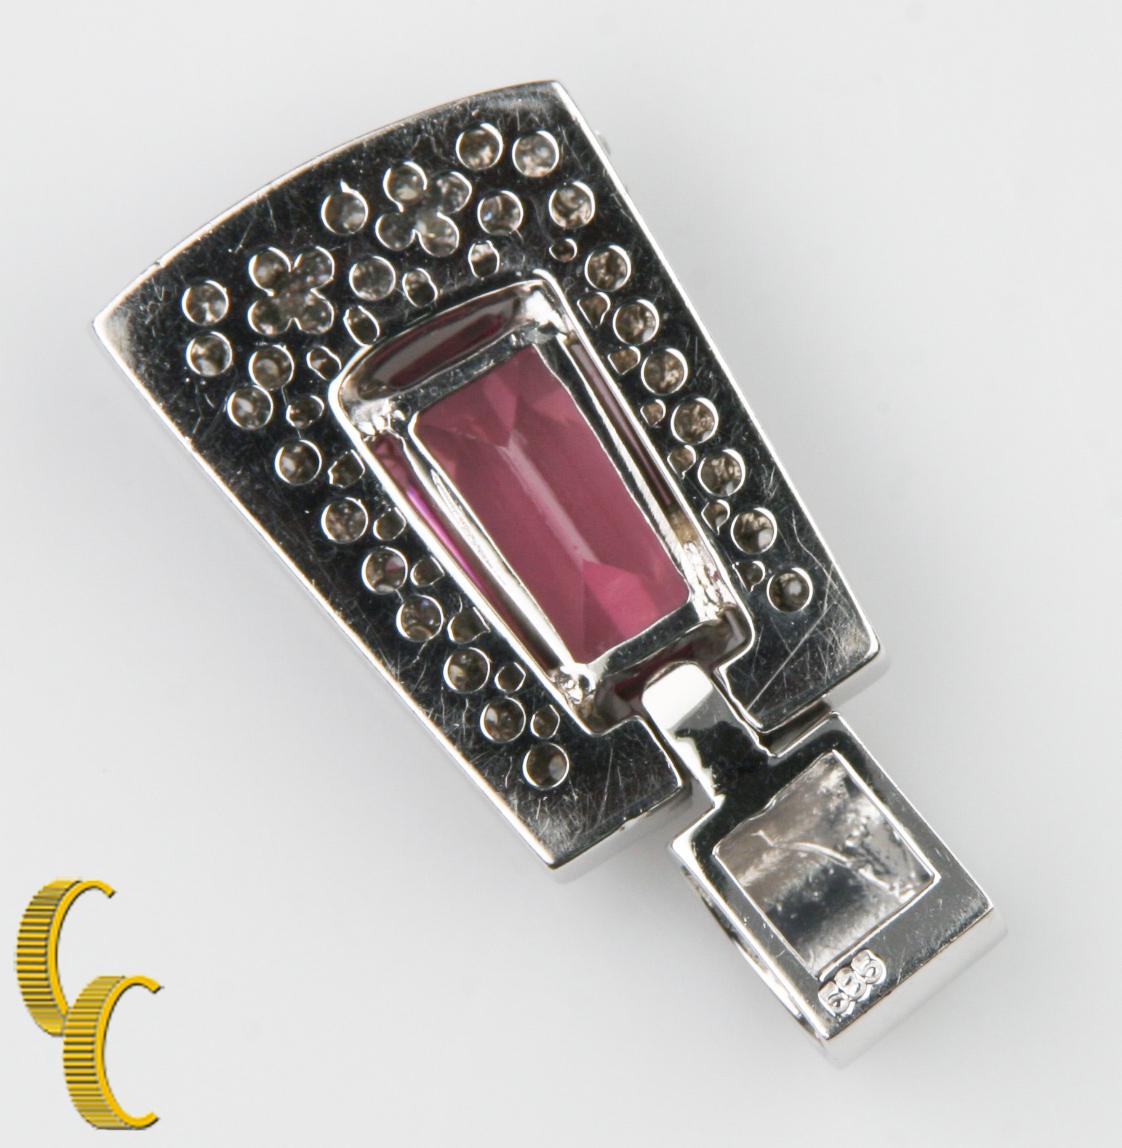 One electronically tested 14k white gold ladies cast & assembled tourmaline and diamond pendant with a bright polish finish.

the pendant features a pink tourmaline set within a pave' set diamond bezel, completed by a white gold bail
identified with